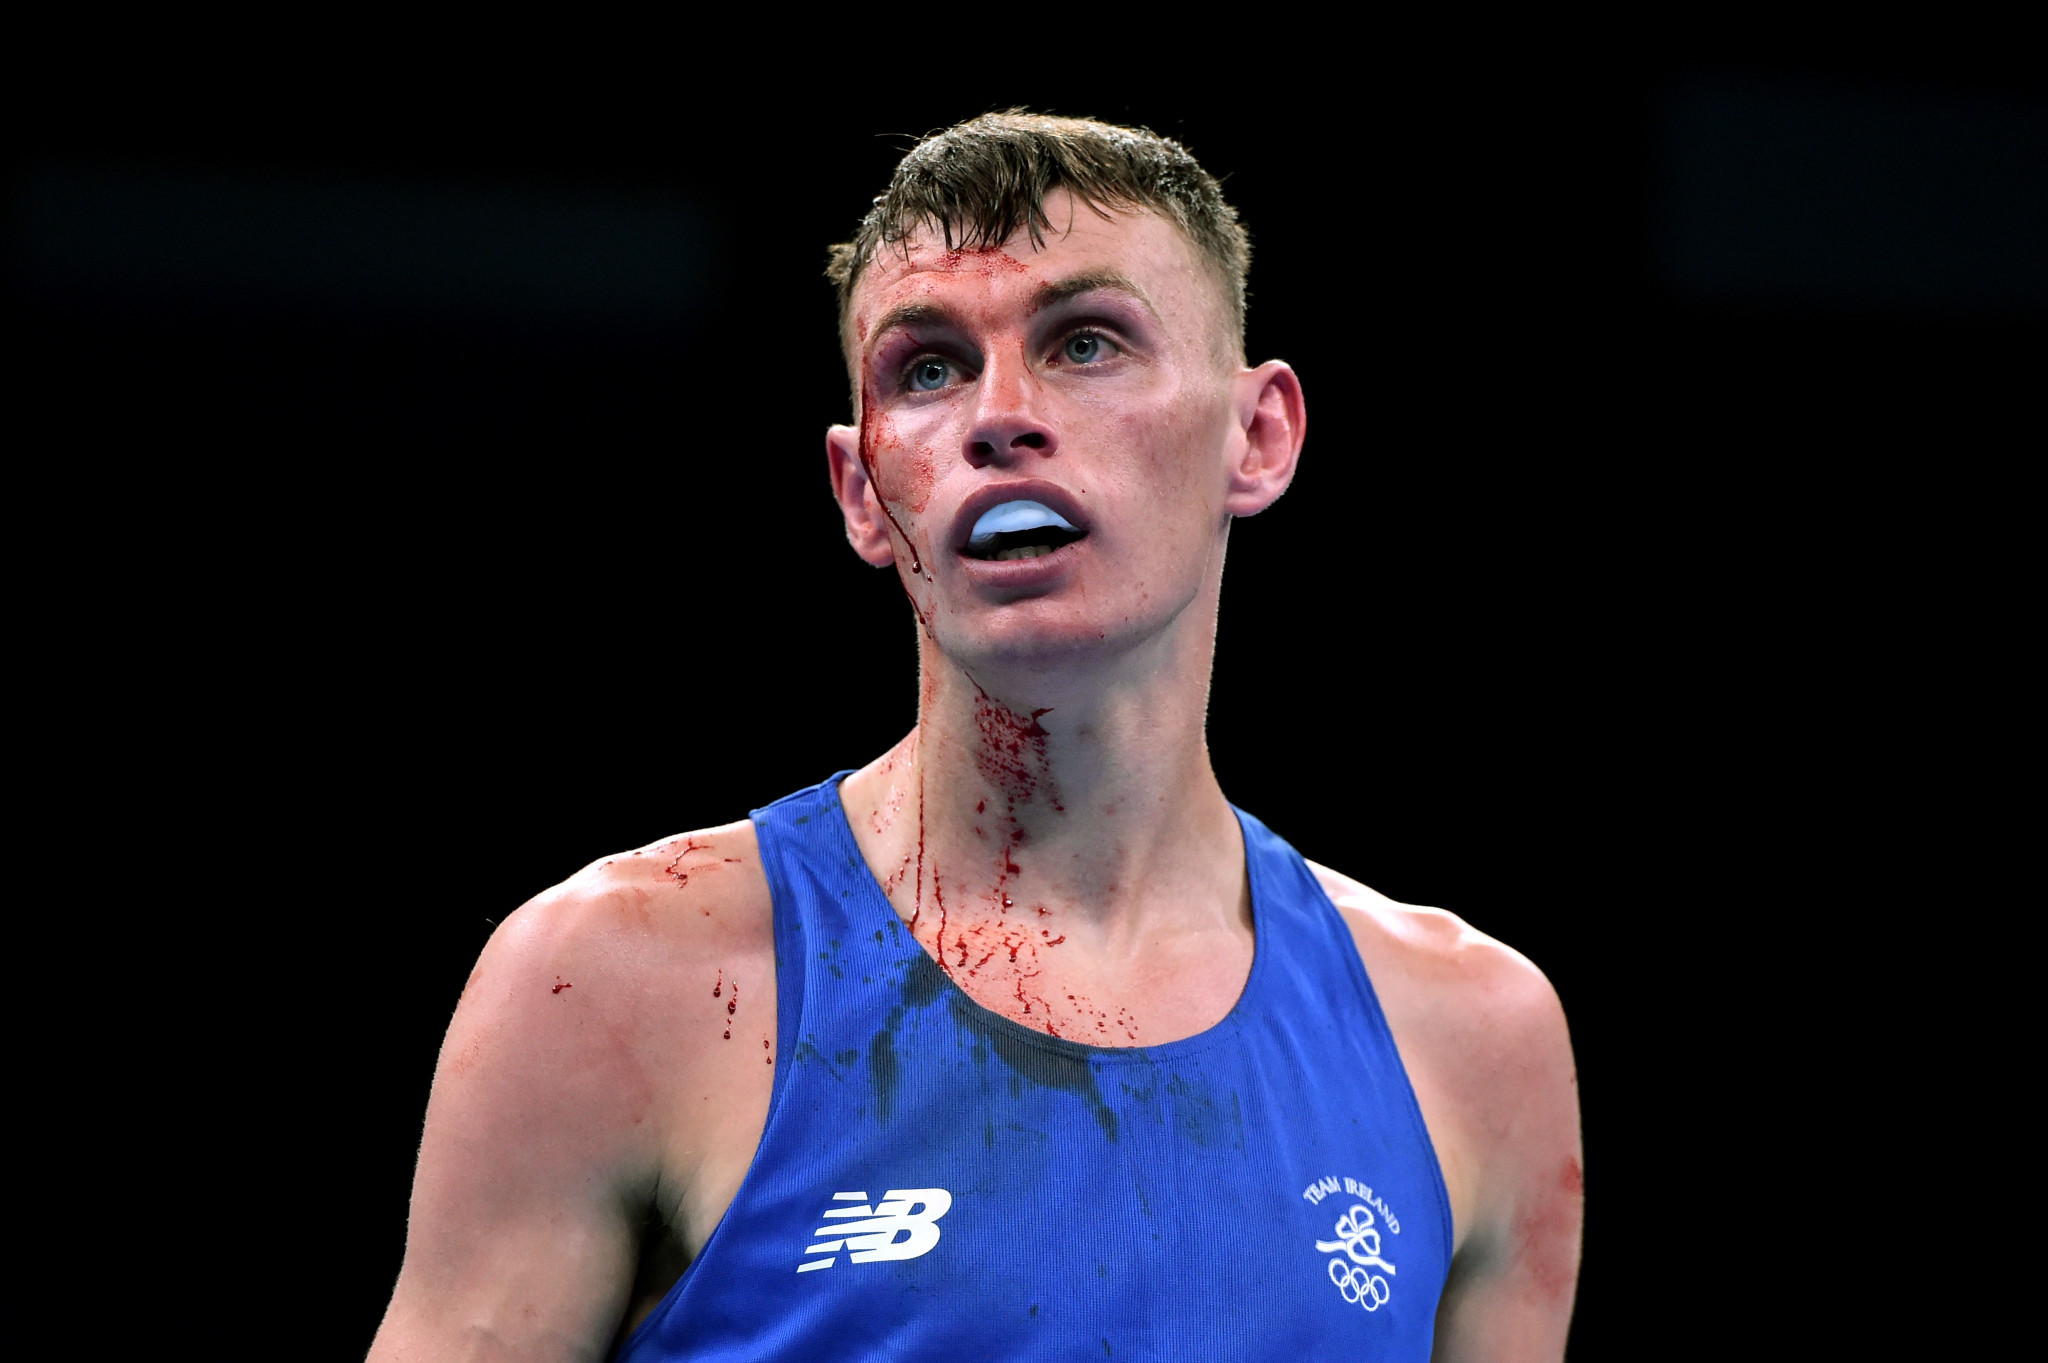 Sean McComb cuts a bloodies figure during a bout ©Getty Images